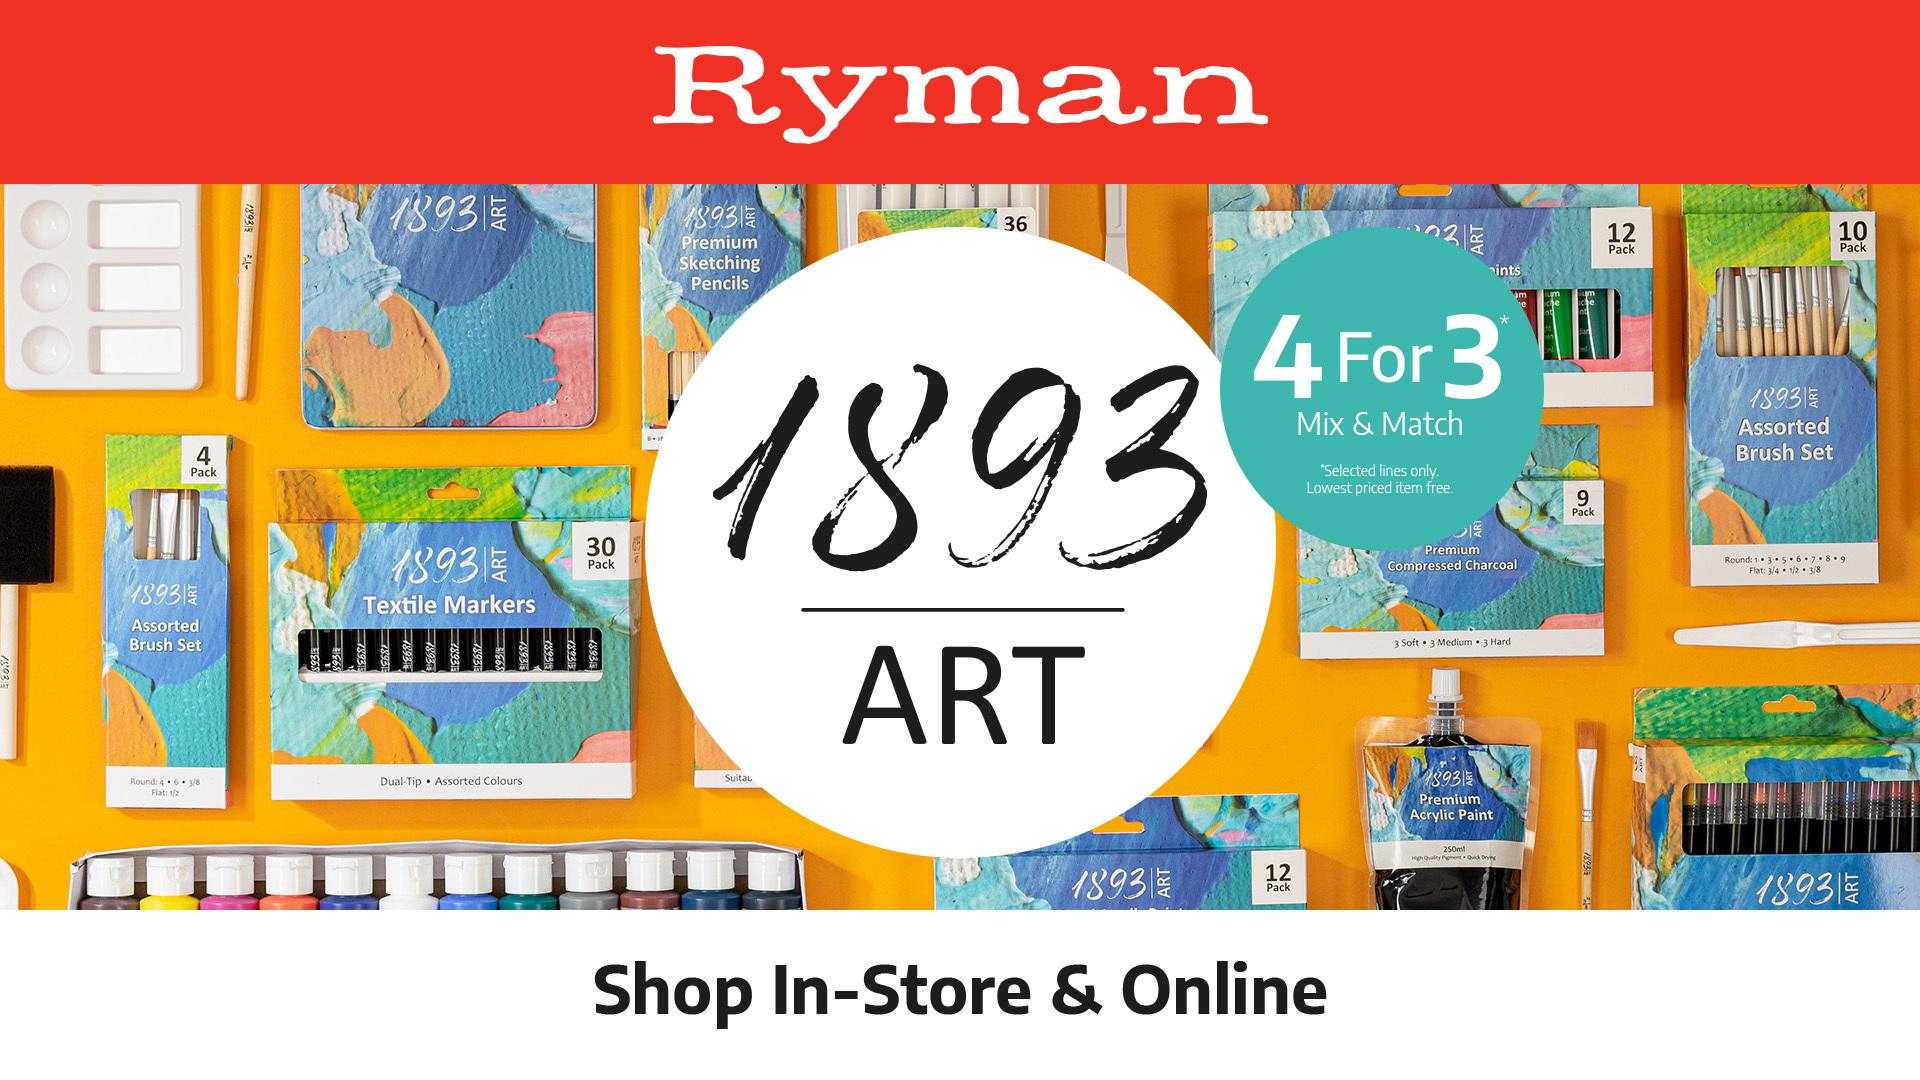 4 for 3 on Arts & Crafts at Ryman